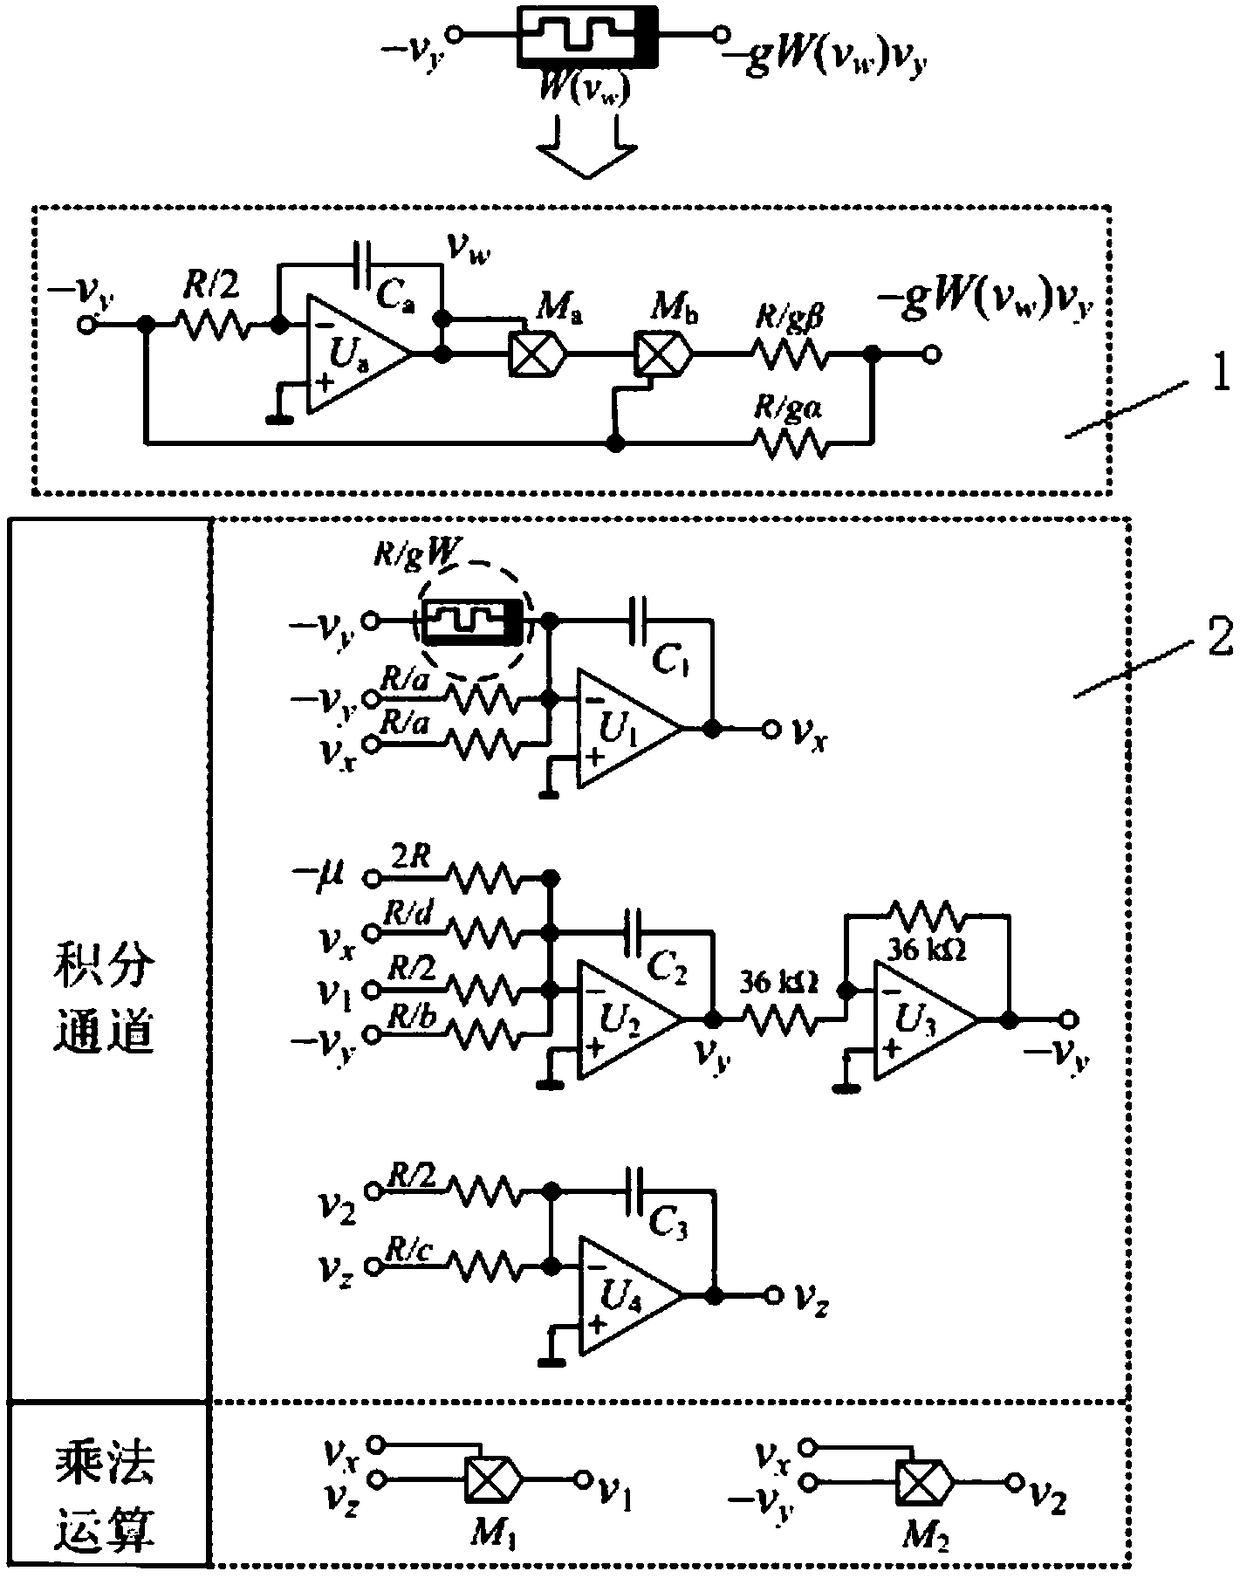 Hyper-chaotic signal source circuit of hidden Lu system based on memristor